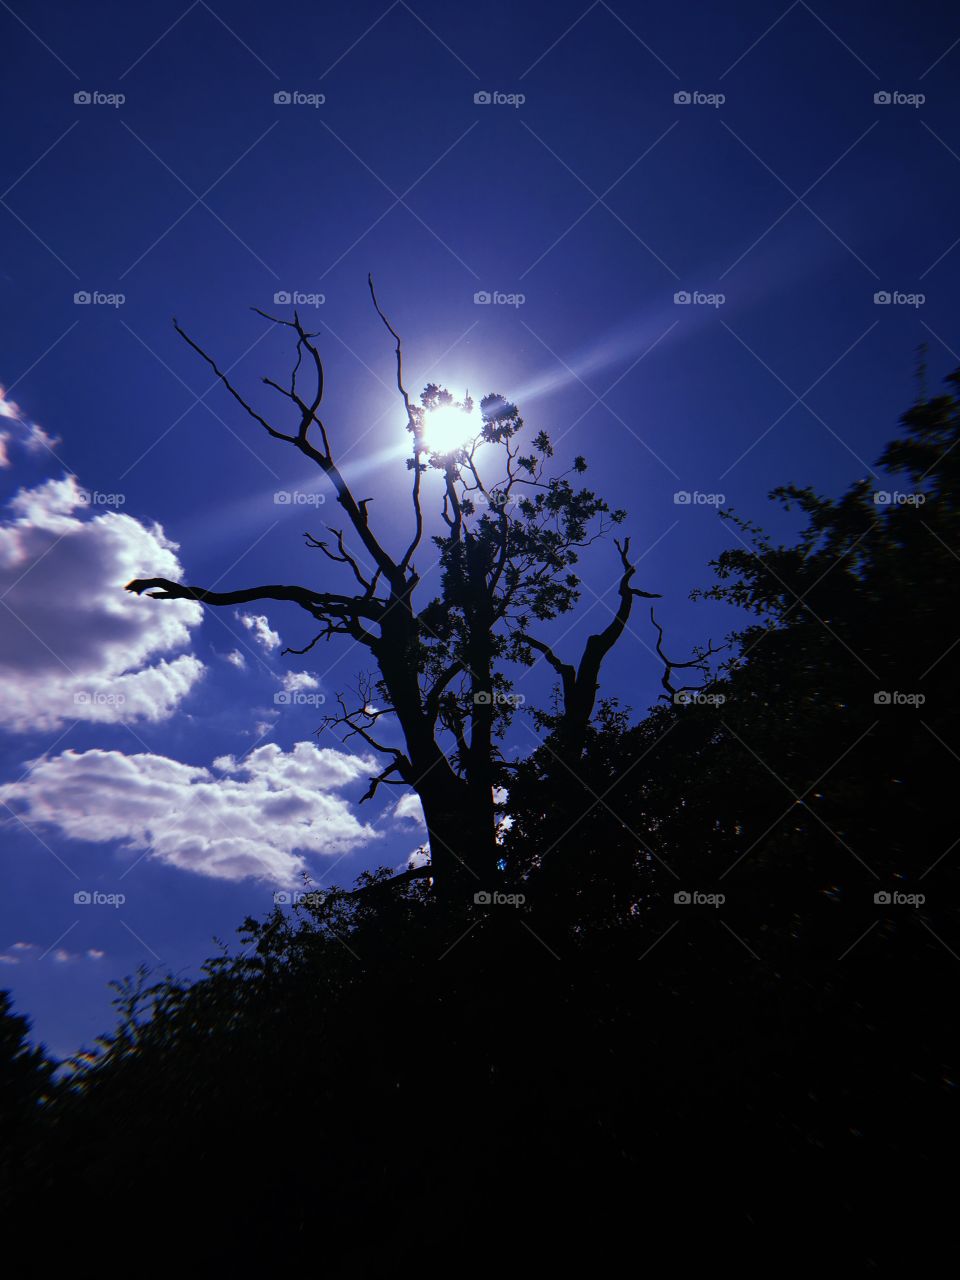 The staggering sun slightly blocked by an outreaching tree, grasping at the brilliant blue sky 